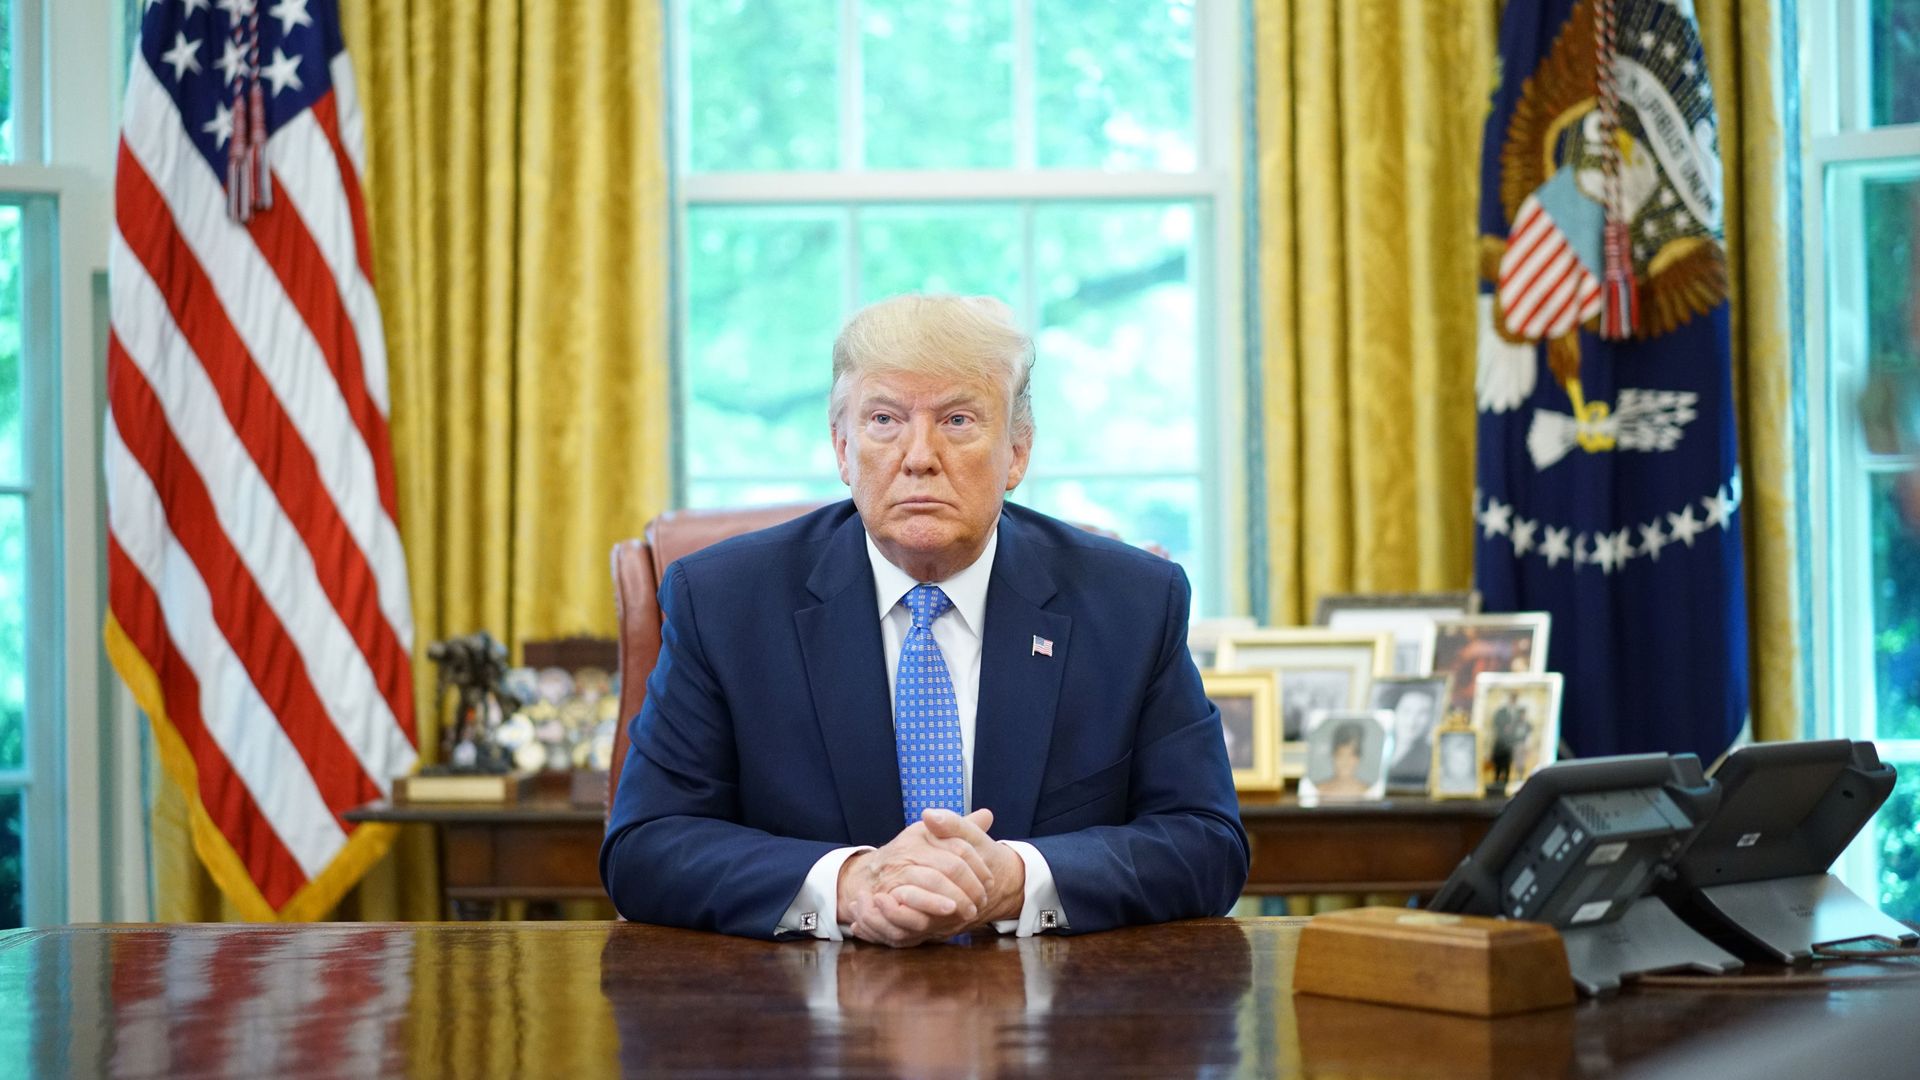 President Donald Trump speaks during a meeting with advisors about fentanyl in the Oval Office of the White House in Washington, DC.